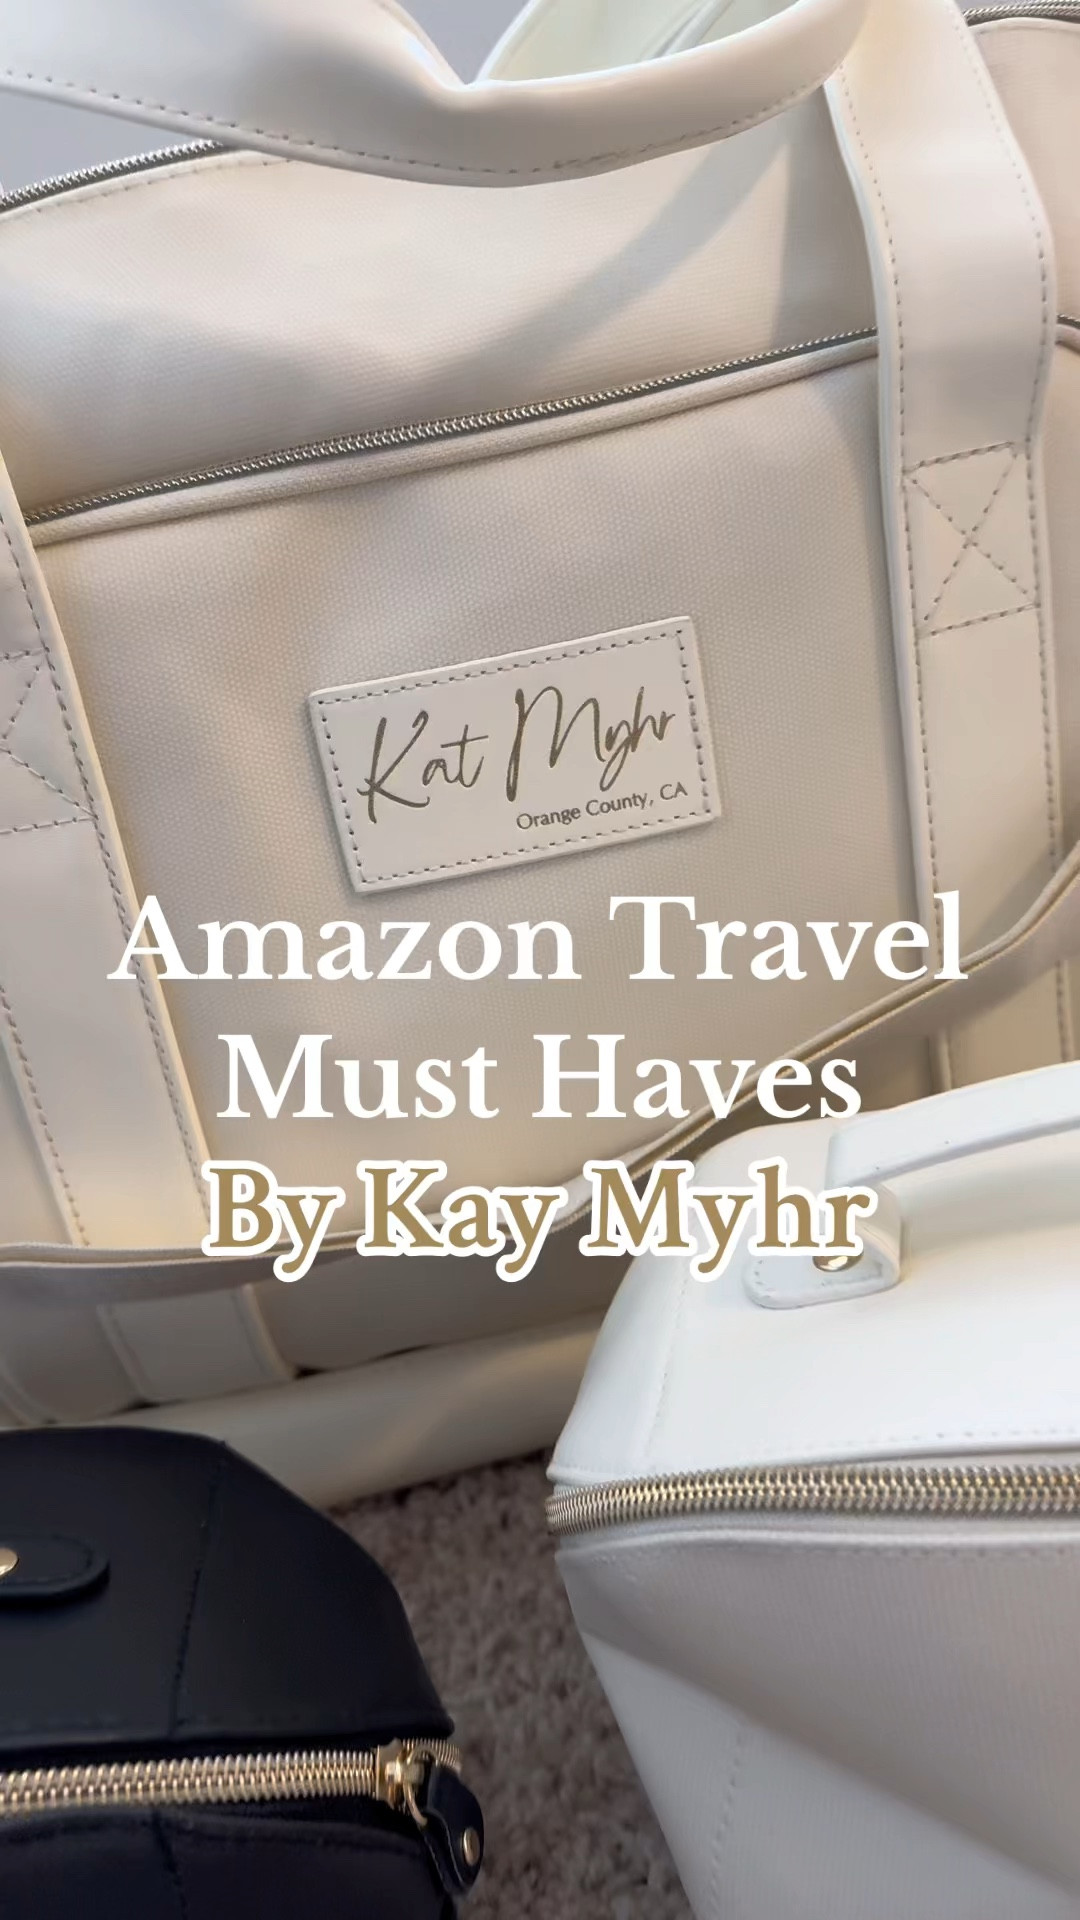 Kat Myhr Womens Weekender Travel Bag - Luxury Quality Carry On Bag for  Airplane & Travel Duffle Bag - Large Weekend Bag for Women Travel with Shoe